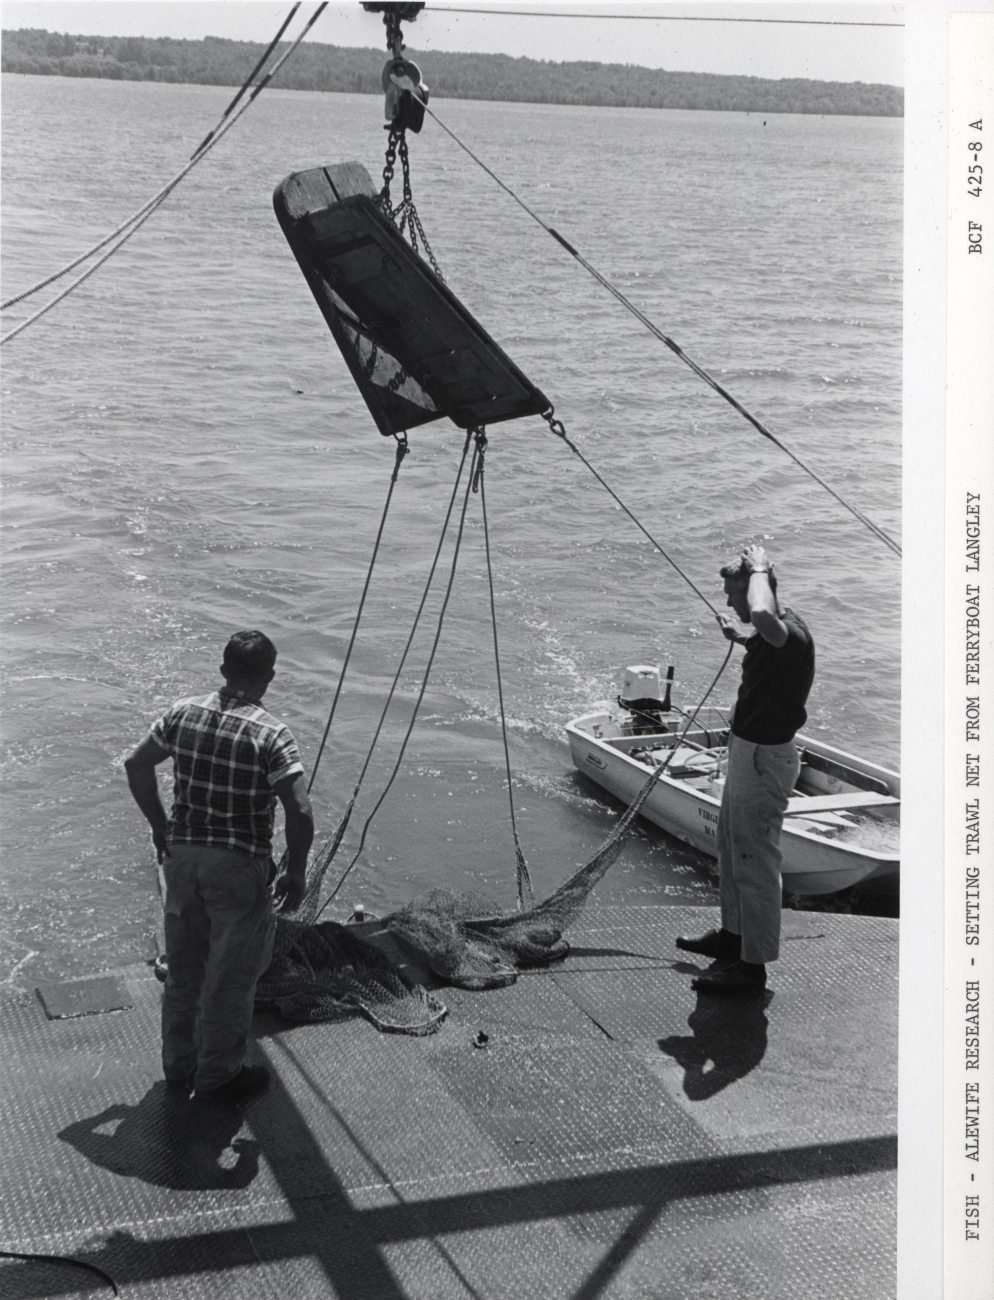 Alewife research - Setting trawl net from Virginia Institute of Marine Scienceferry boat LANGLEY